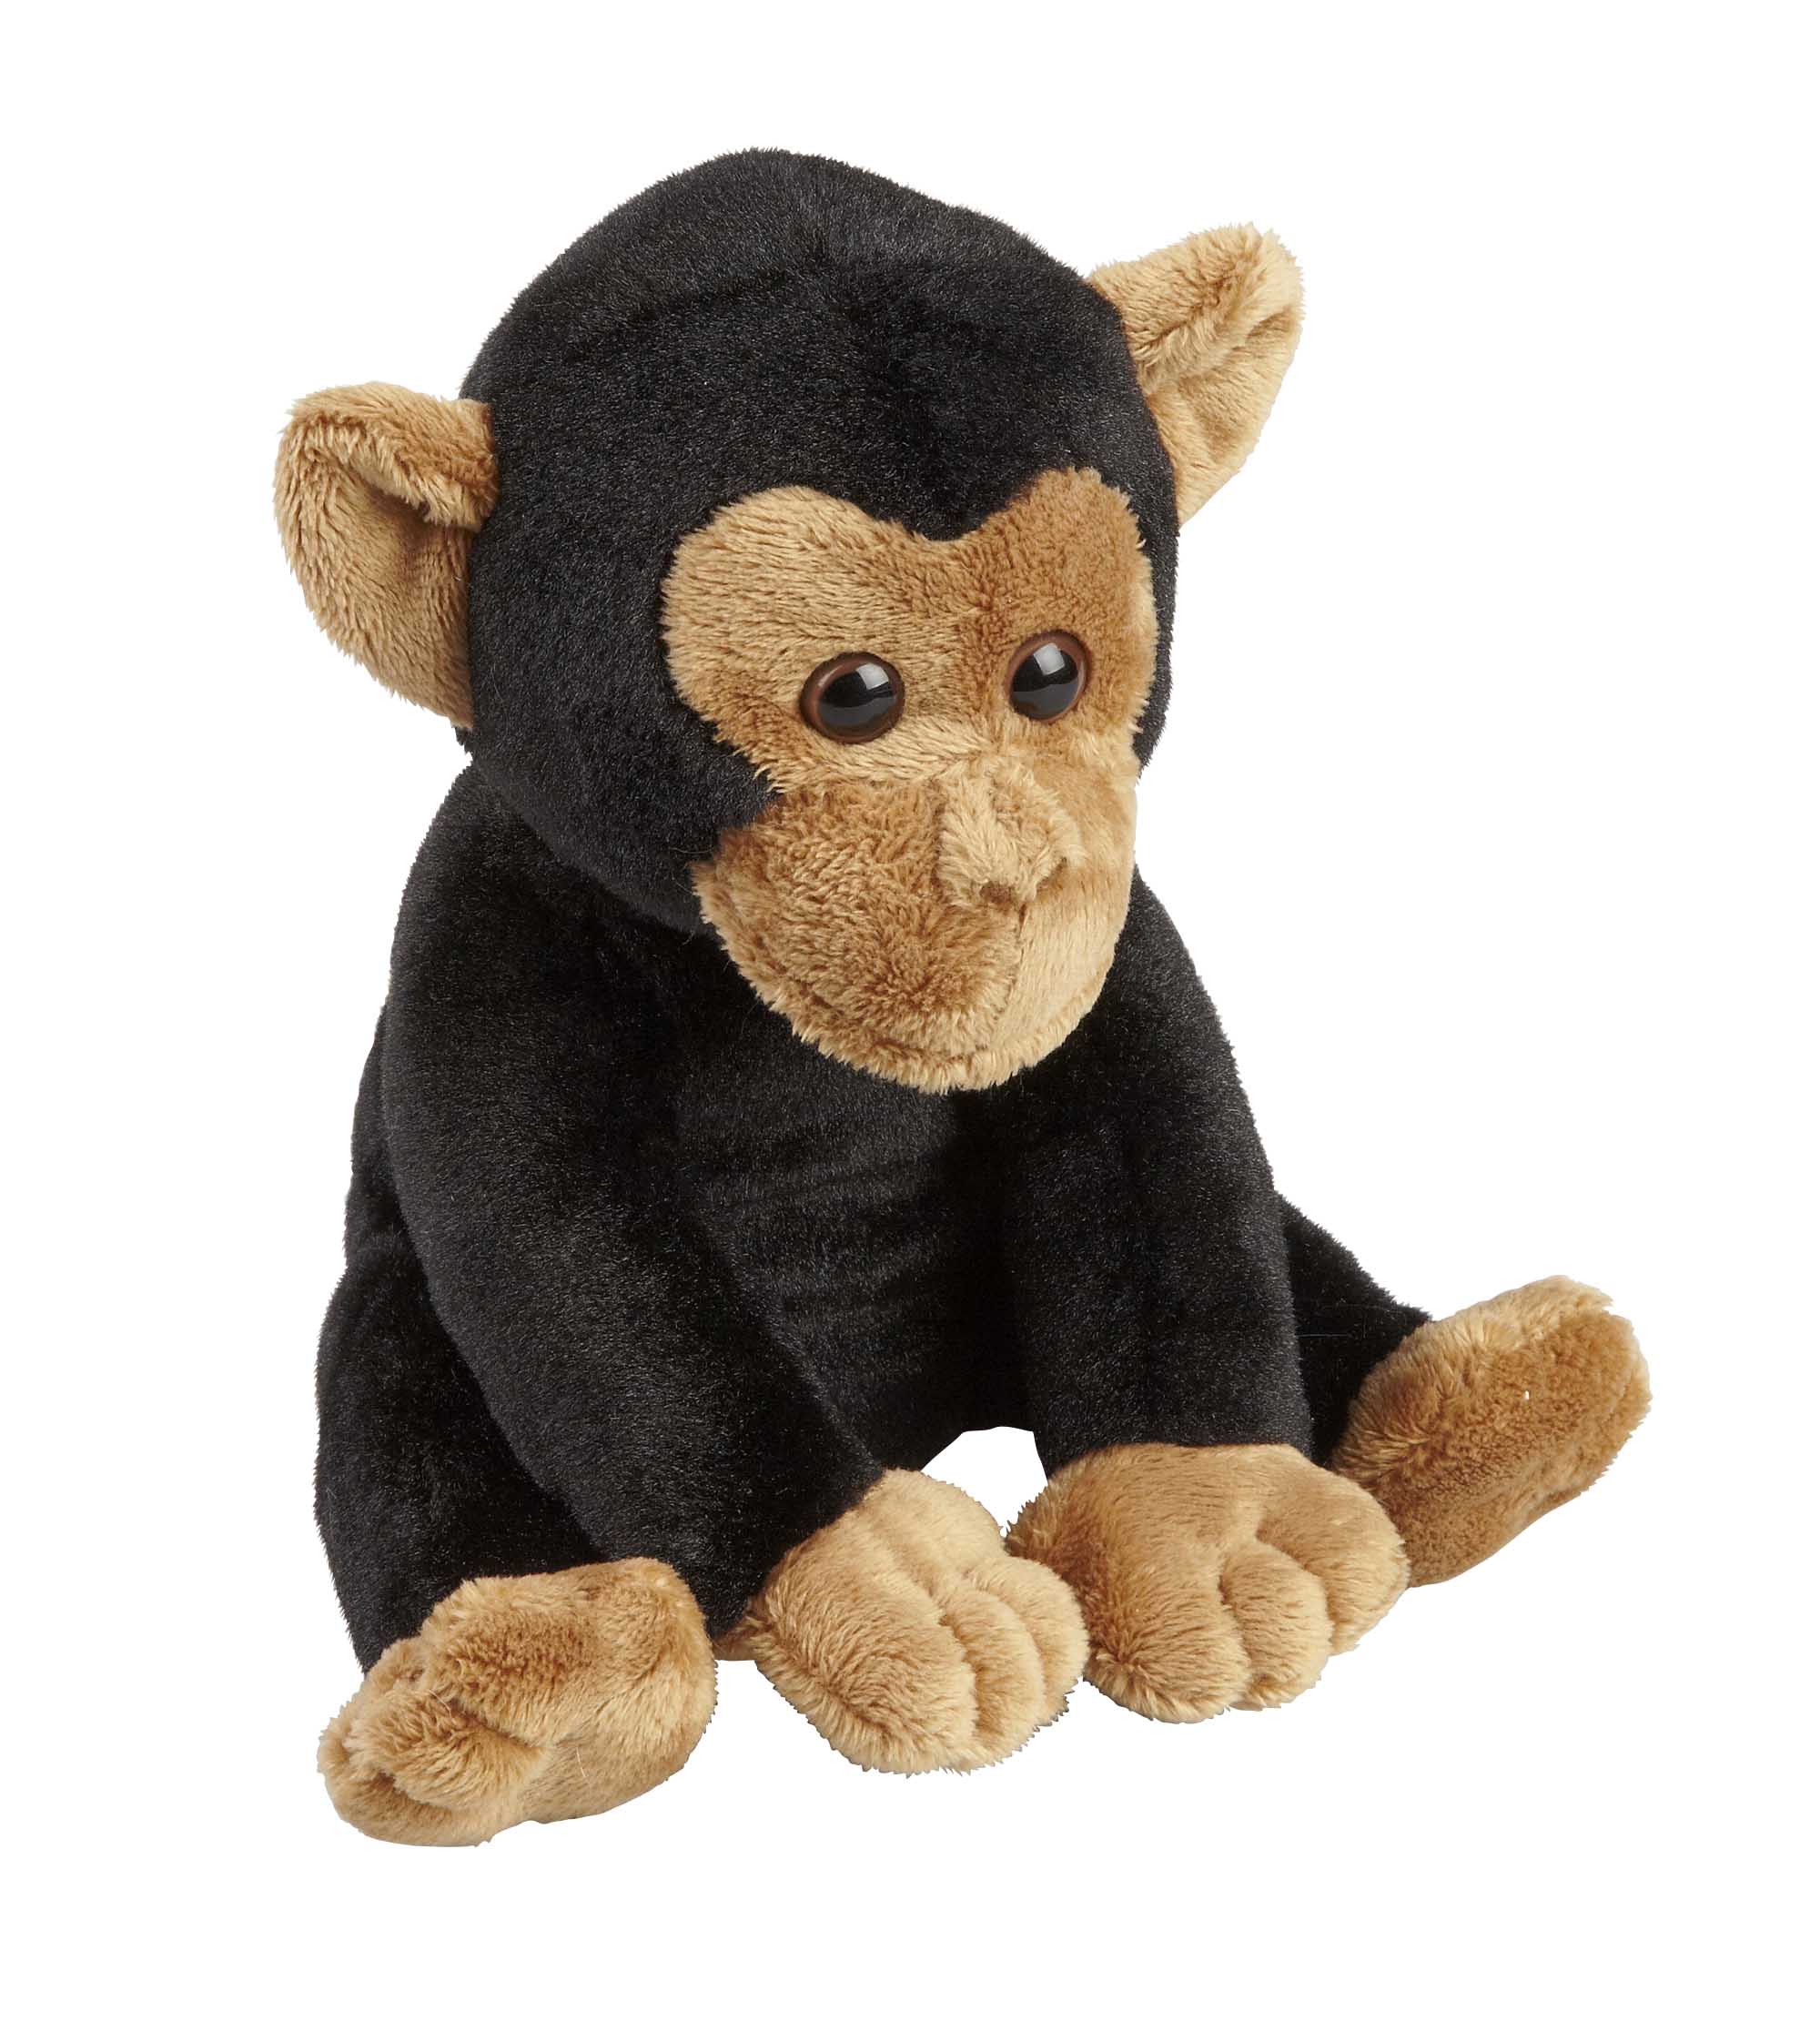 Toy Monkey For Museums